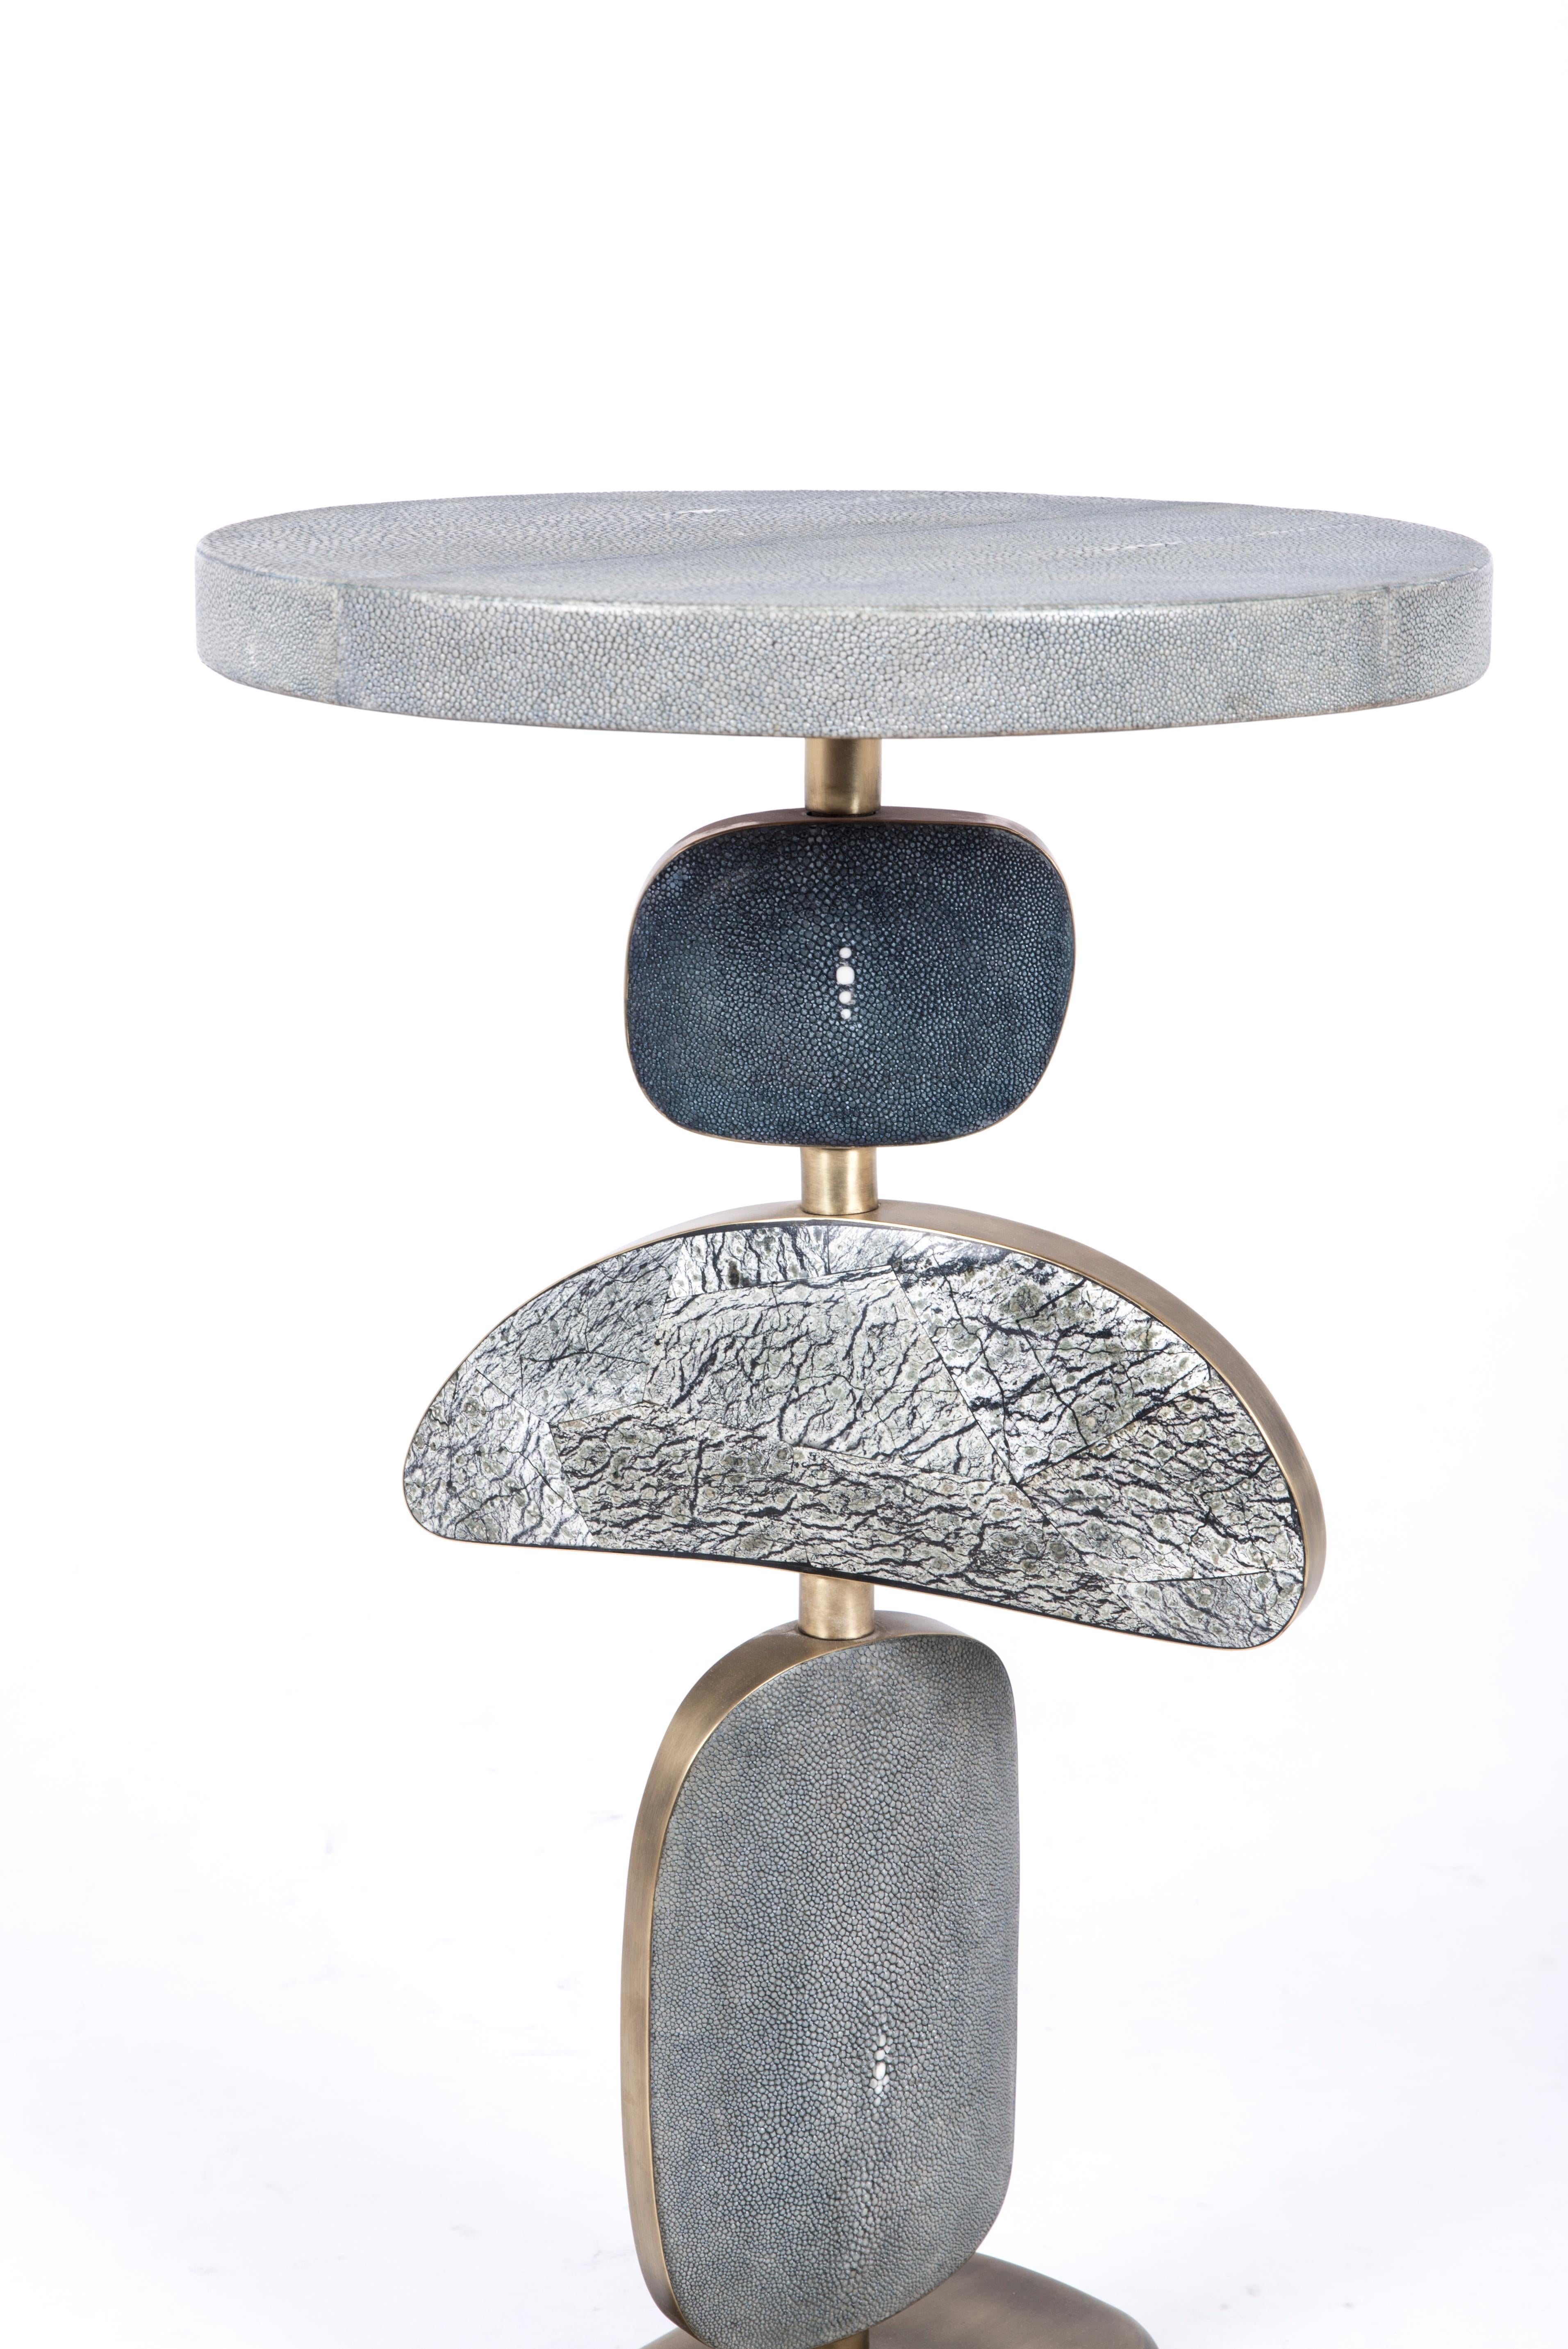 Art Deco Cosmo Side Table in Cream Shagreen, Stone and Bronze-Patina Brass by Kifu, Paris